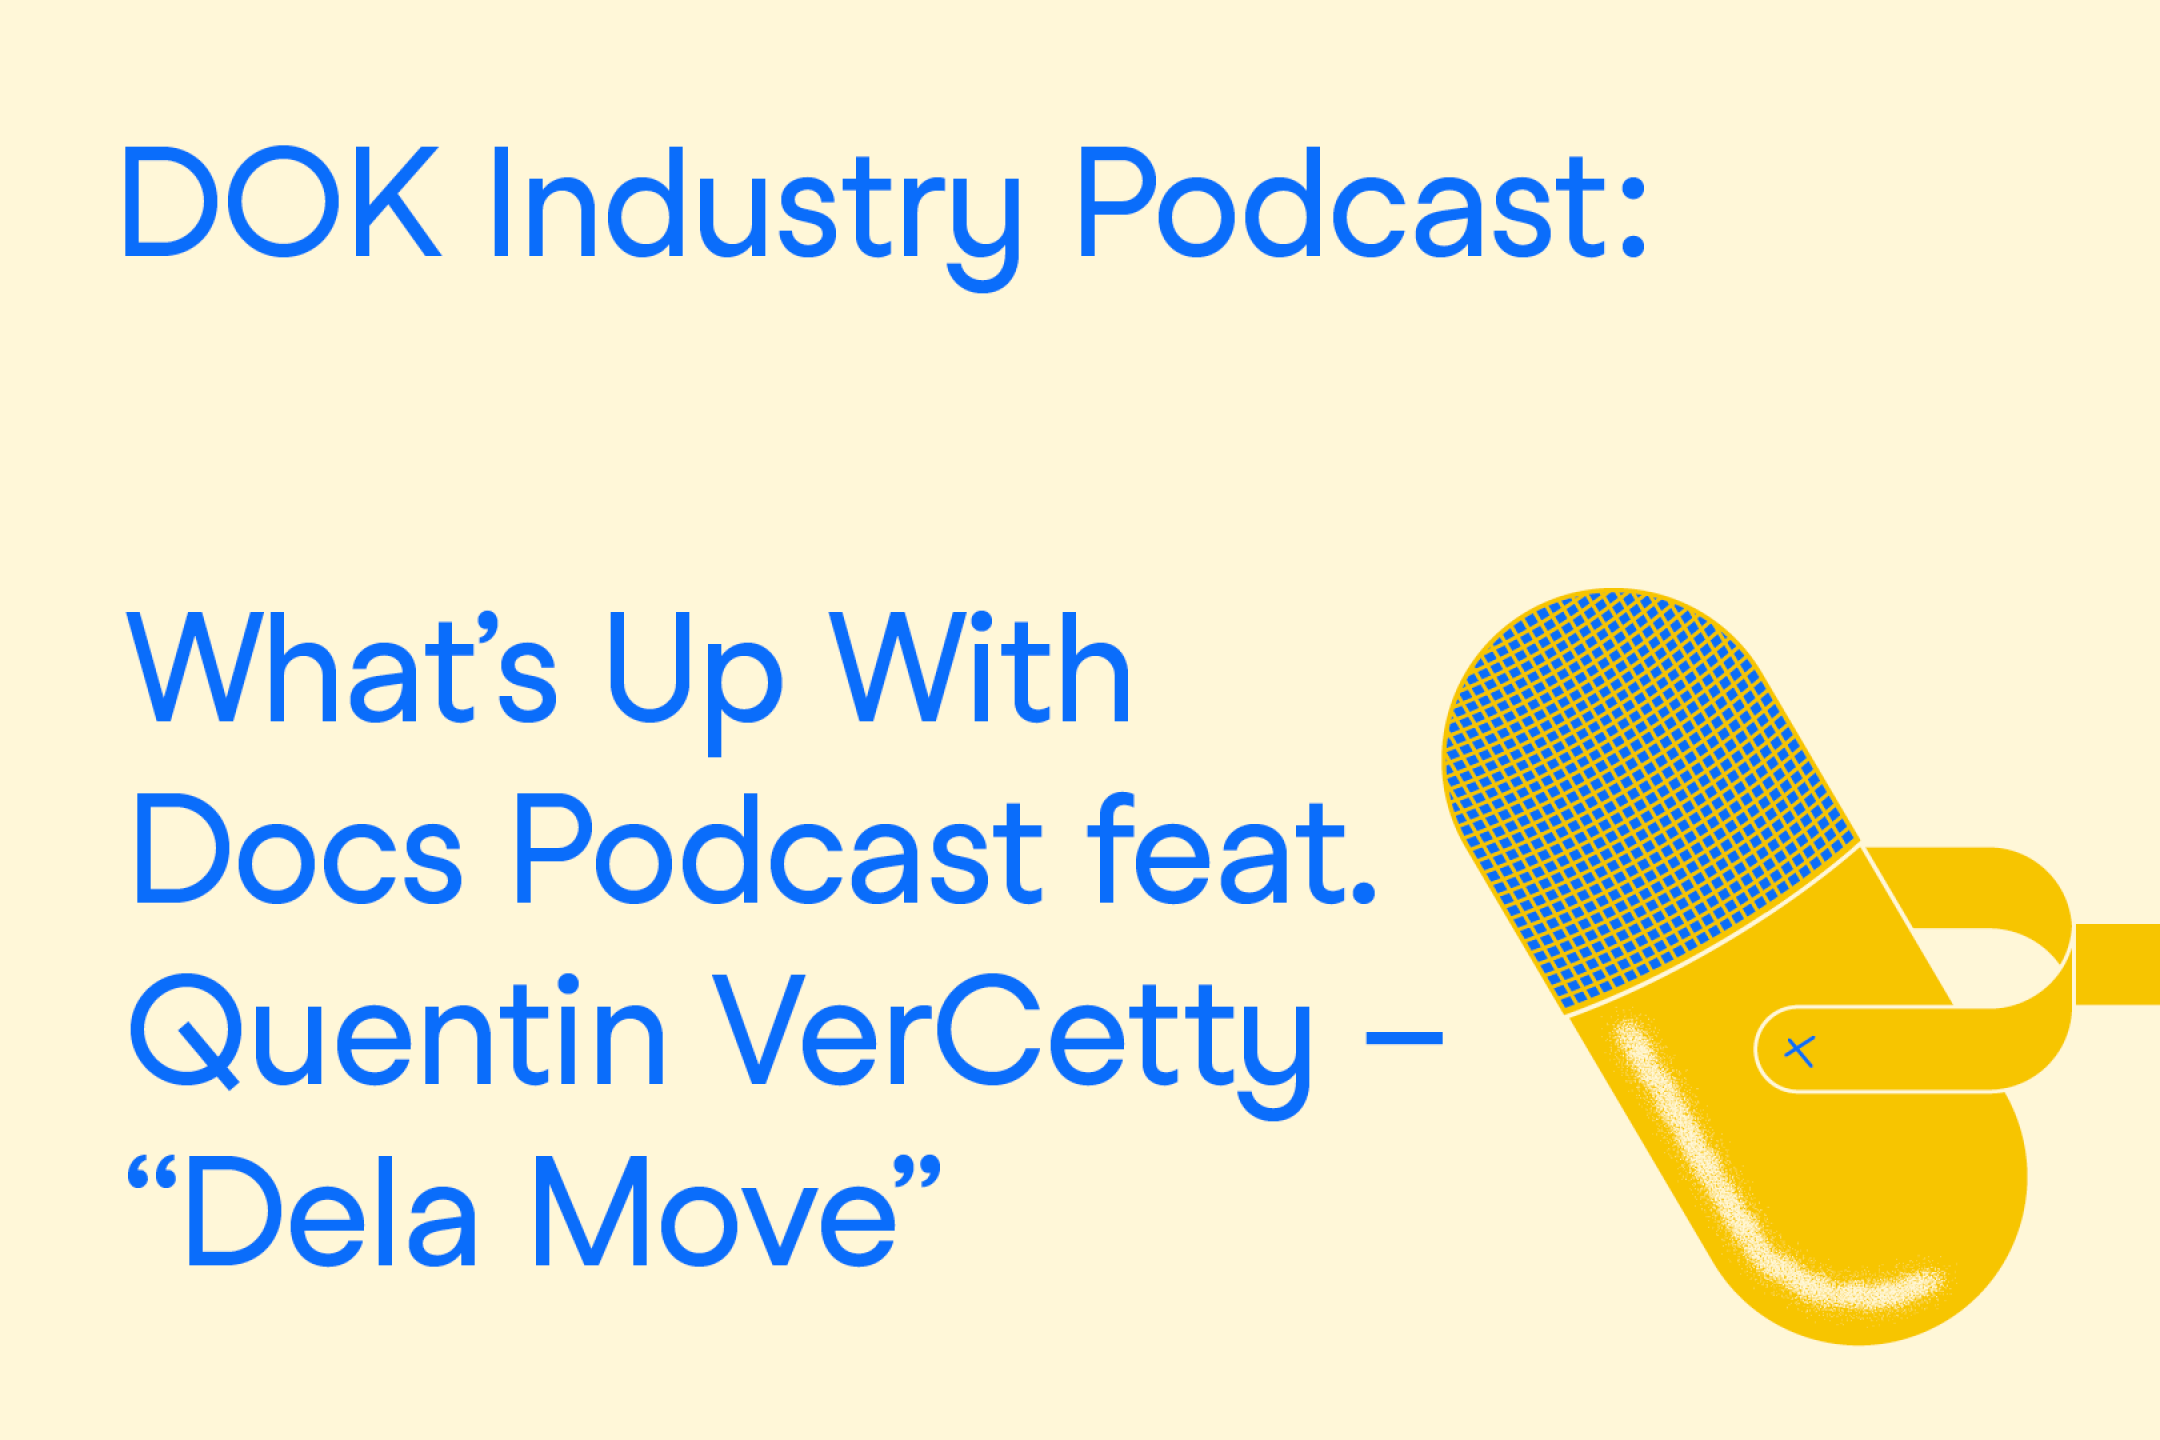 A text graphic with blue letters on a yellow background. At the right the illustration of a microphone. At the left the text: “DOK Industry Podcast: What’s Up With Docs Podcast feat. Quentin VerCetty – “Dela Move””